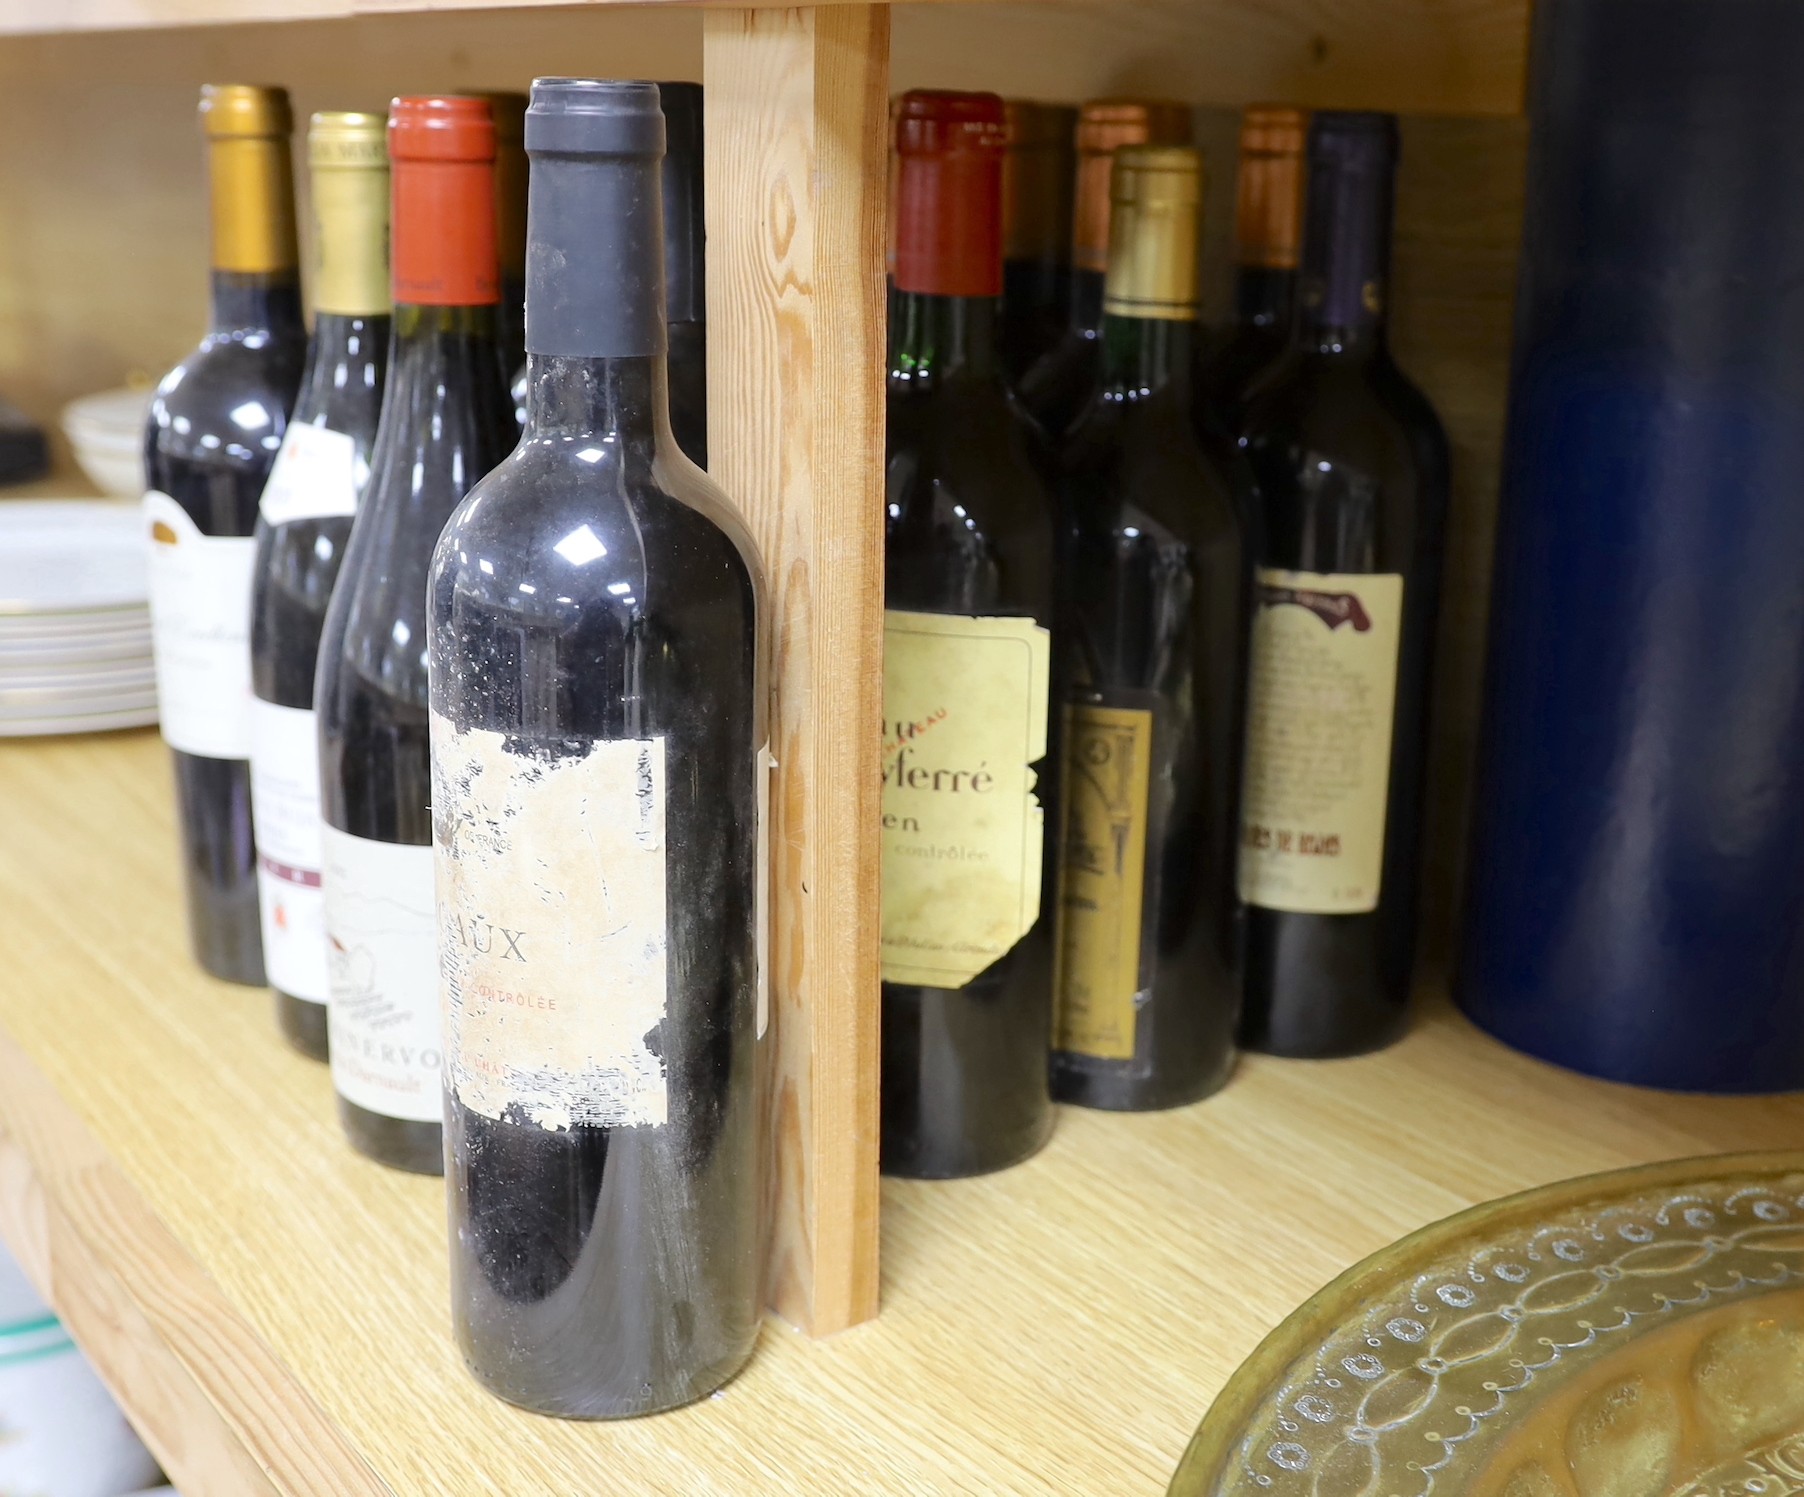 20 various bottles of red wine including 5 bottles of Reserve d’Excellence 2011, 7 bottles of Pauillac 2006, etc.